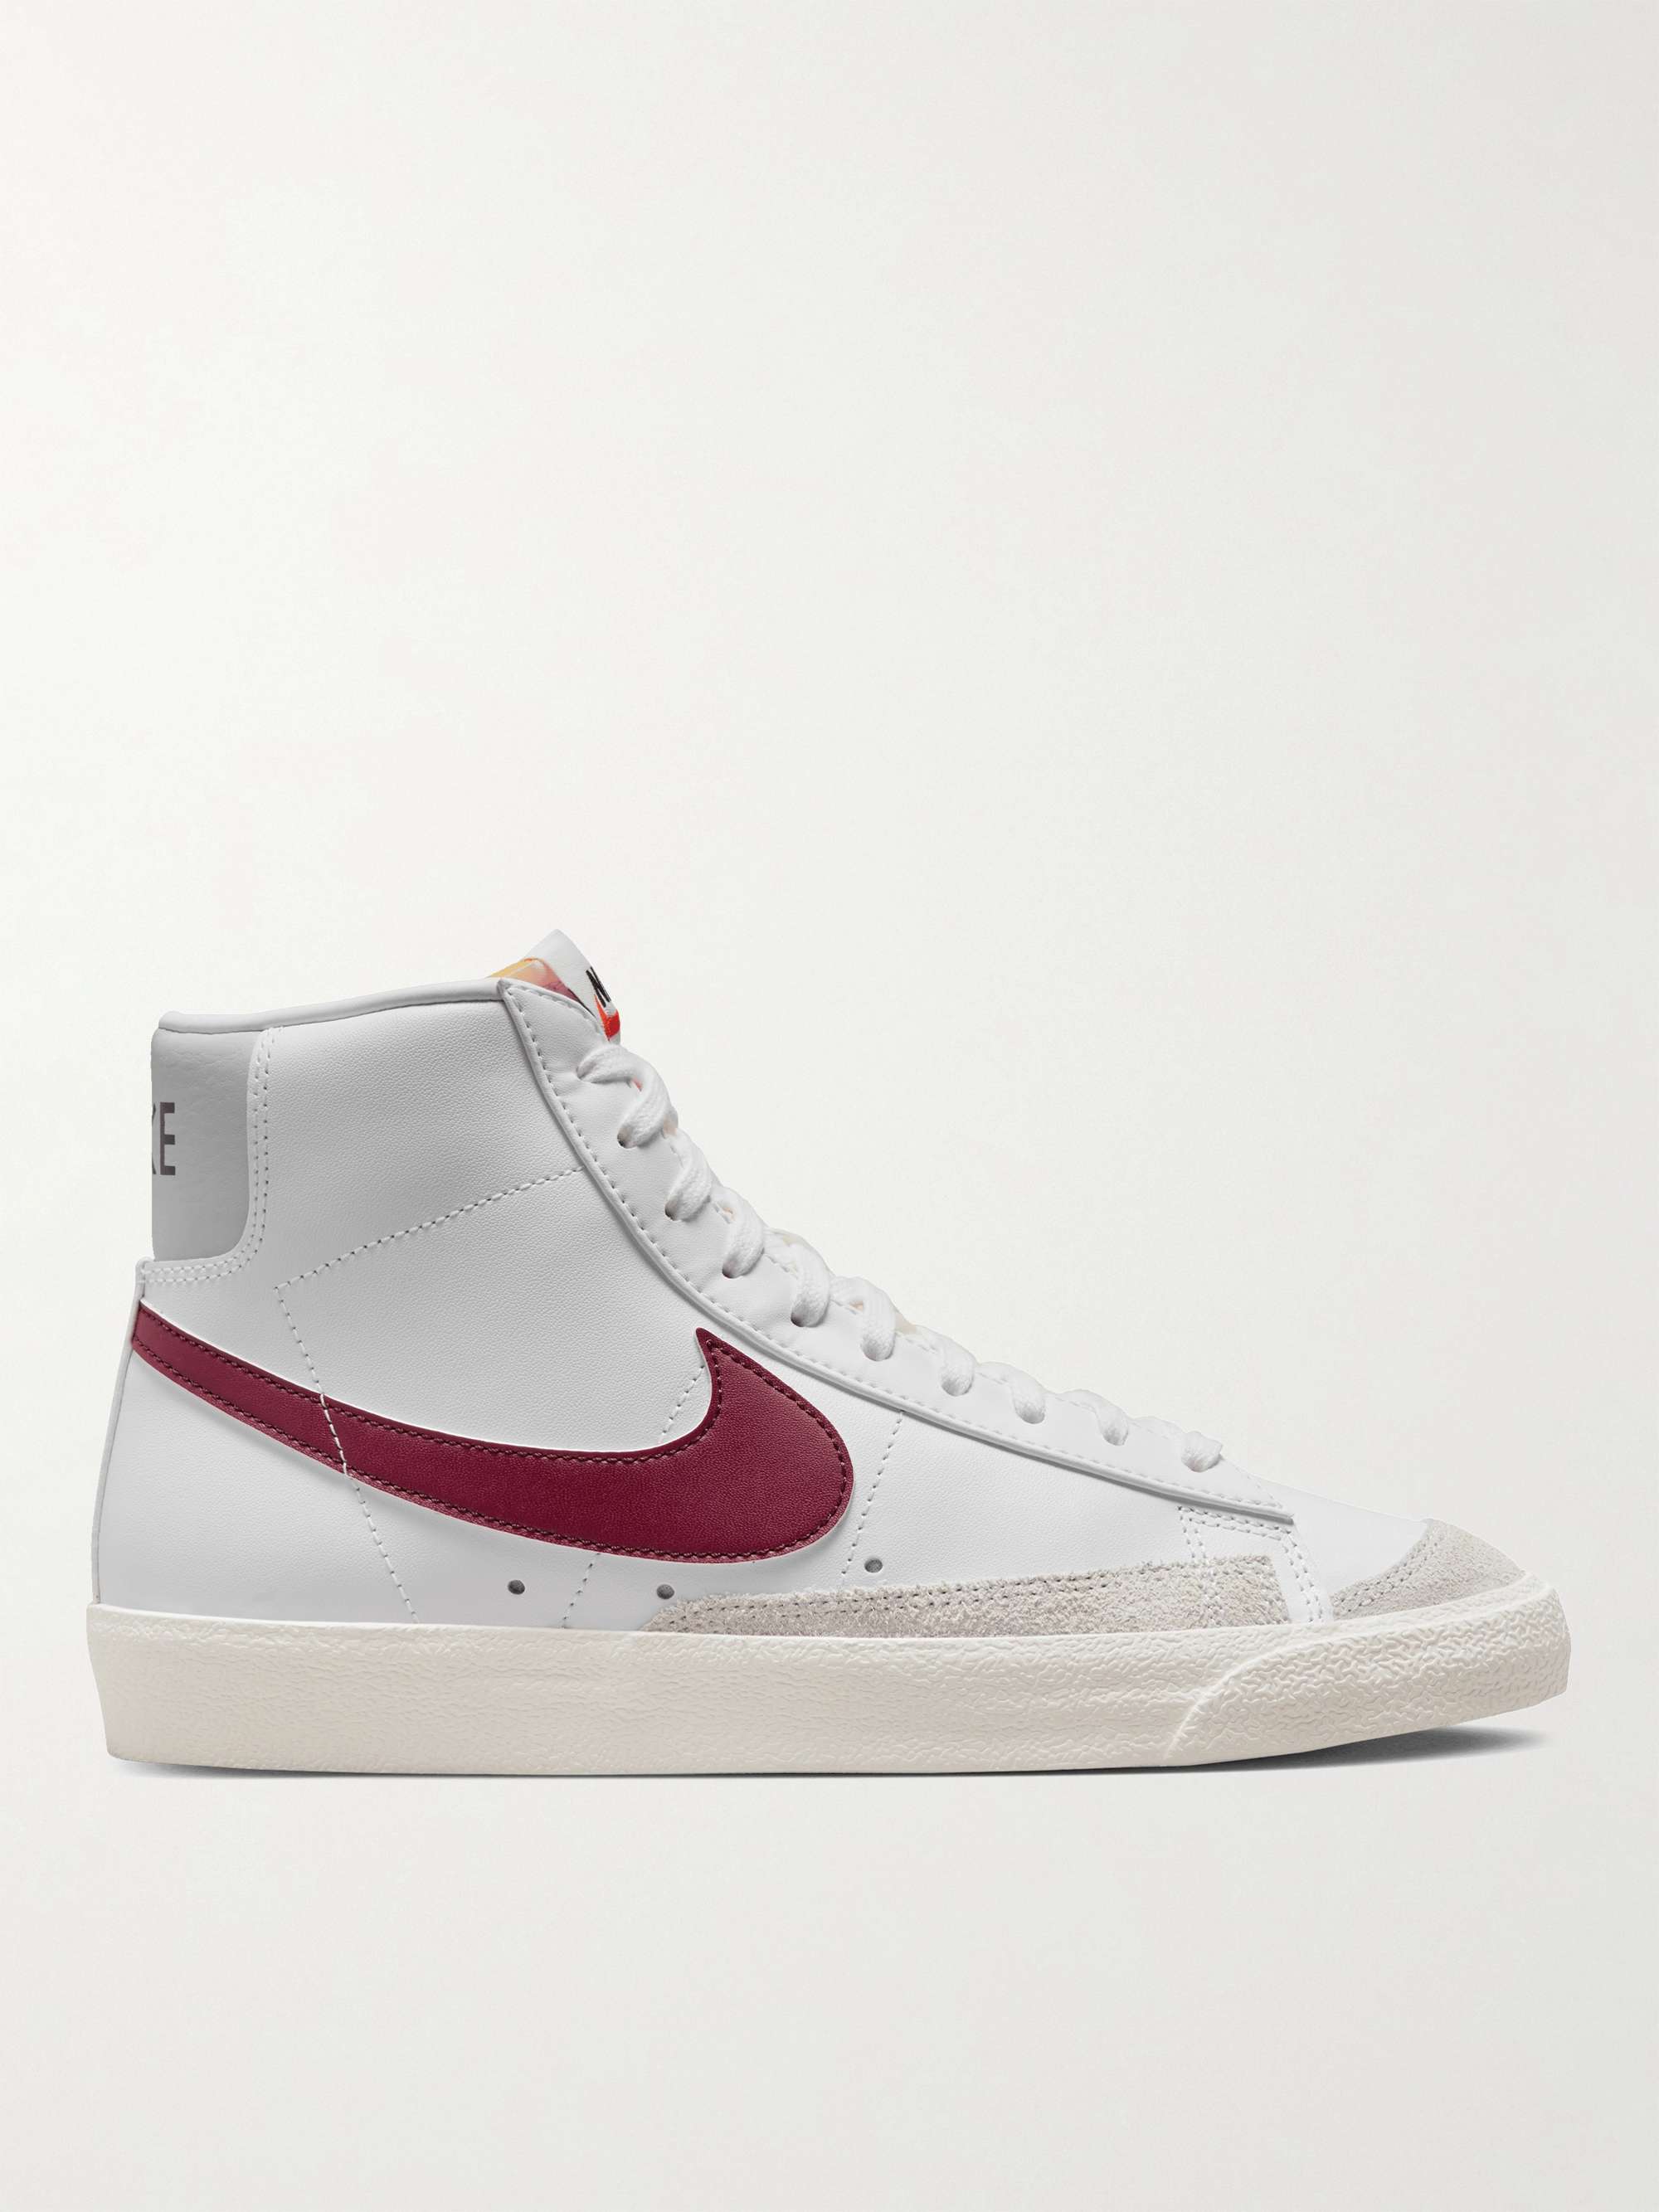 White Blazer Mid '77 Vintage Suede-Trimmed Leather Sneakers | NIKE | MR  PORTER